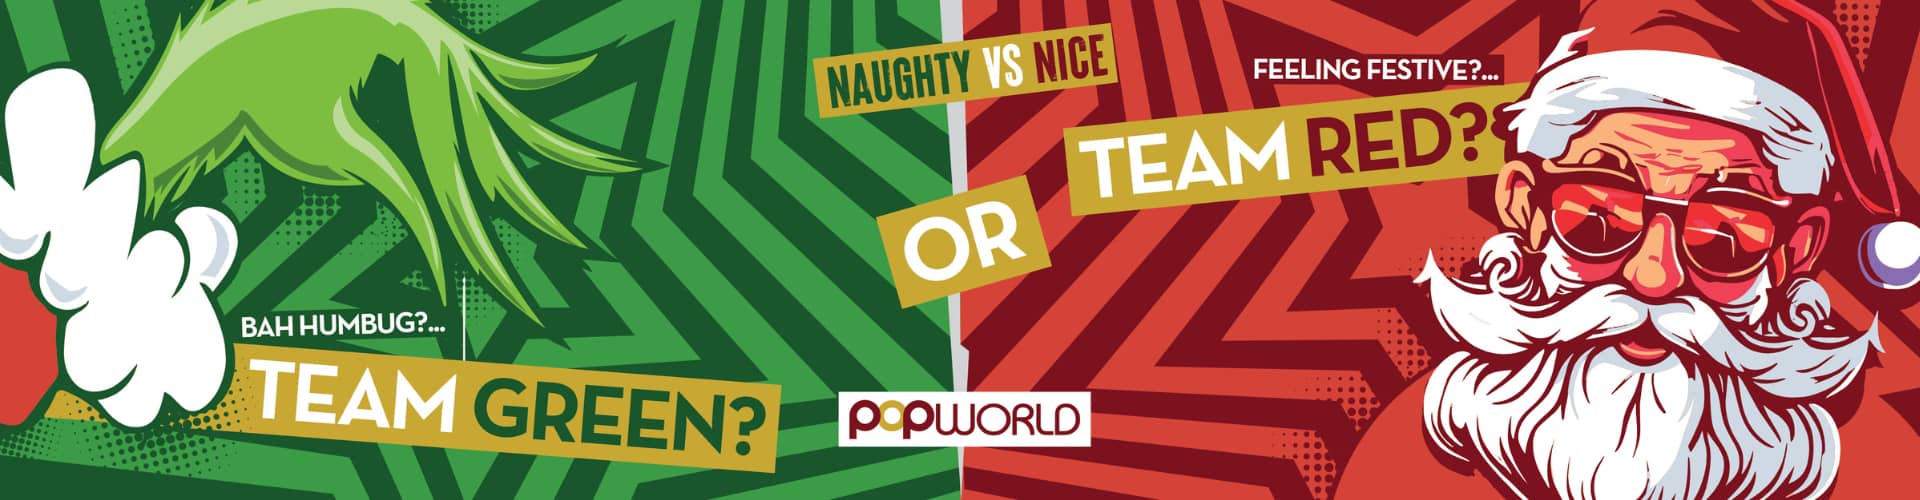 Popworld Leeds - Naughty vs Nice - Are you Team Green or Team Red?